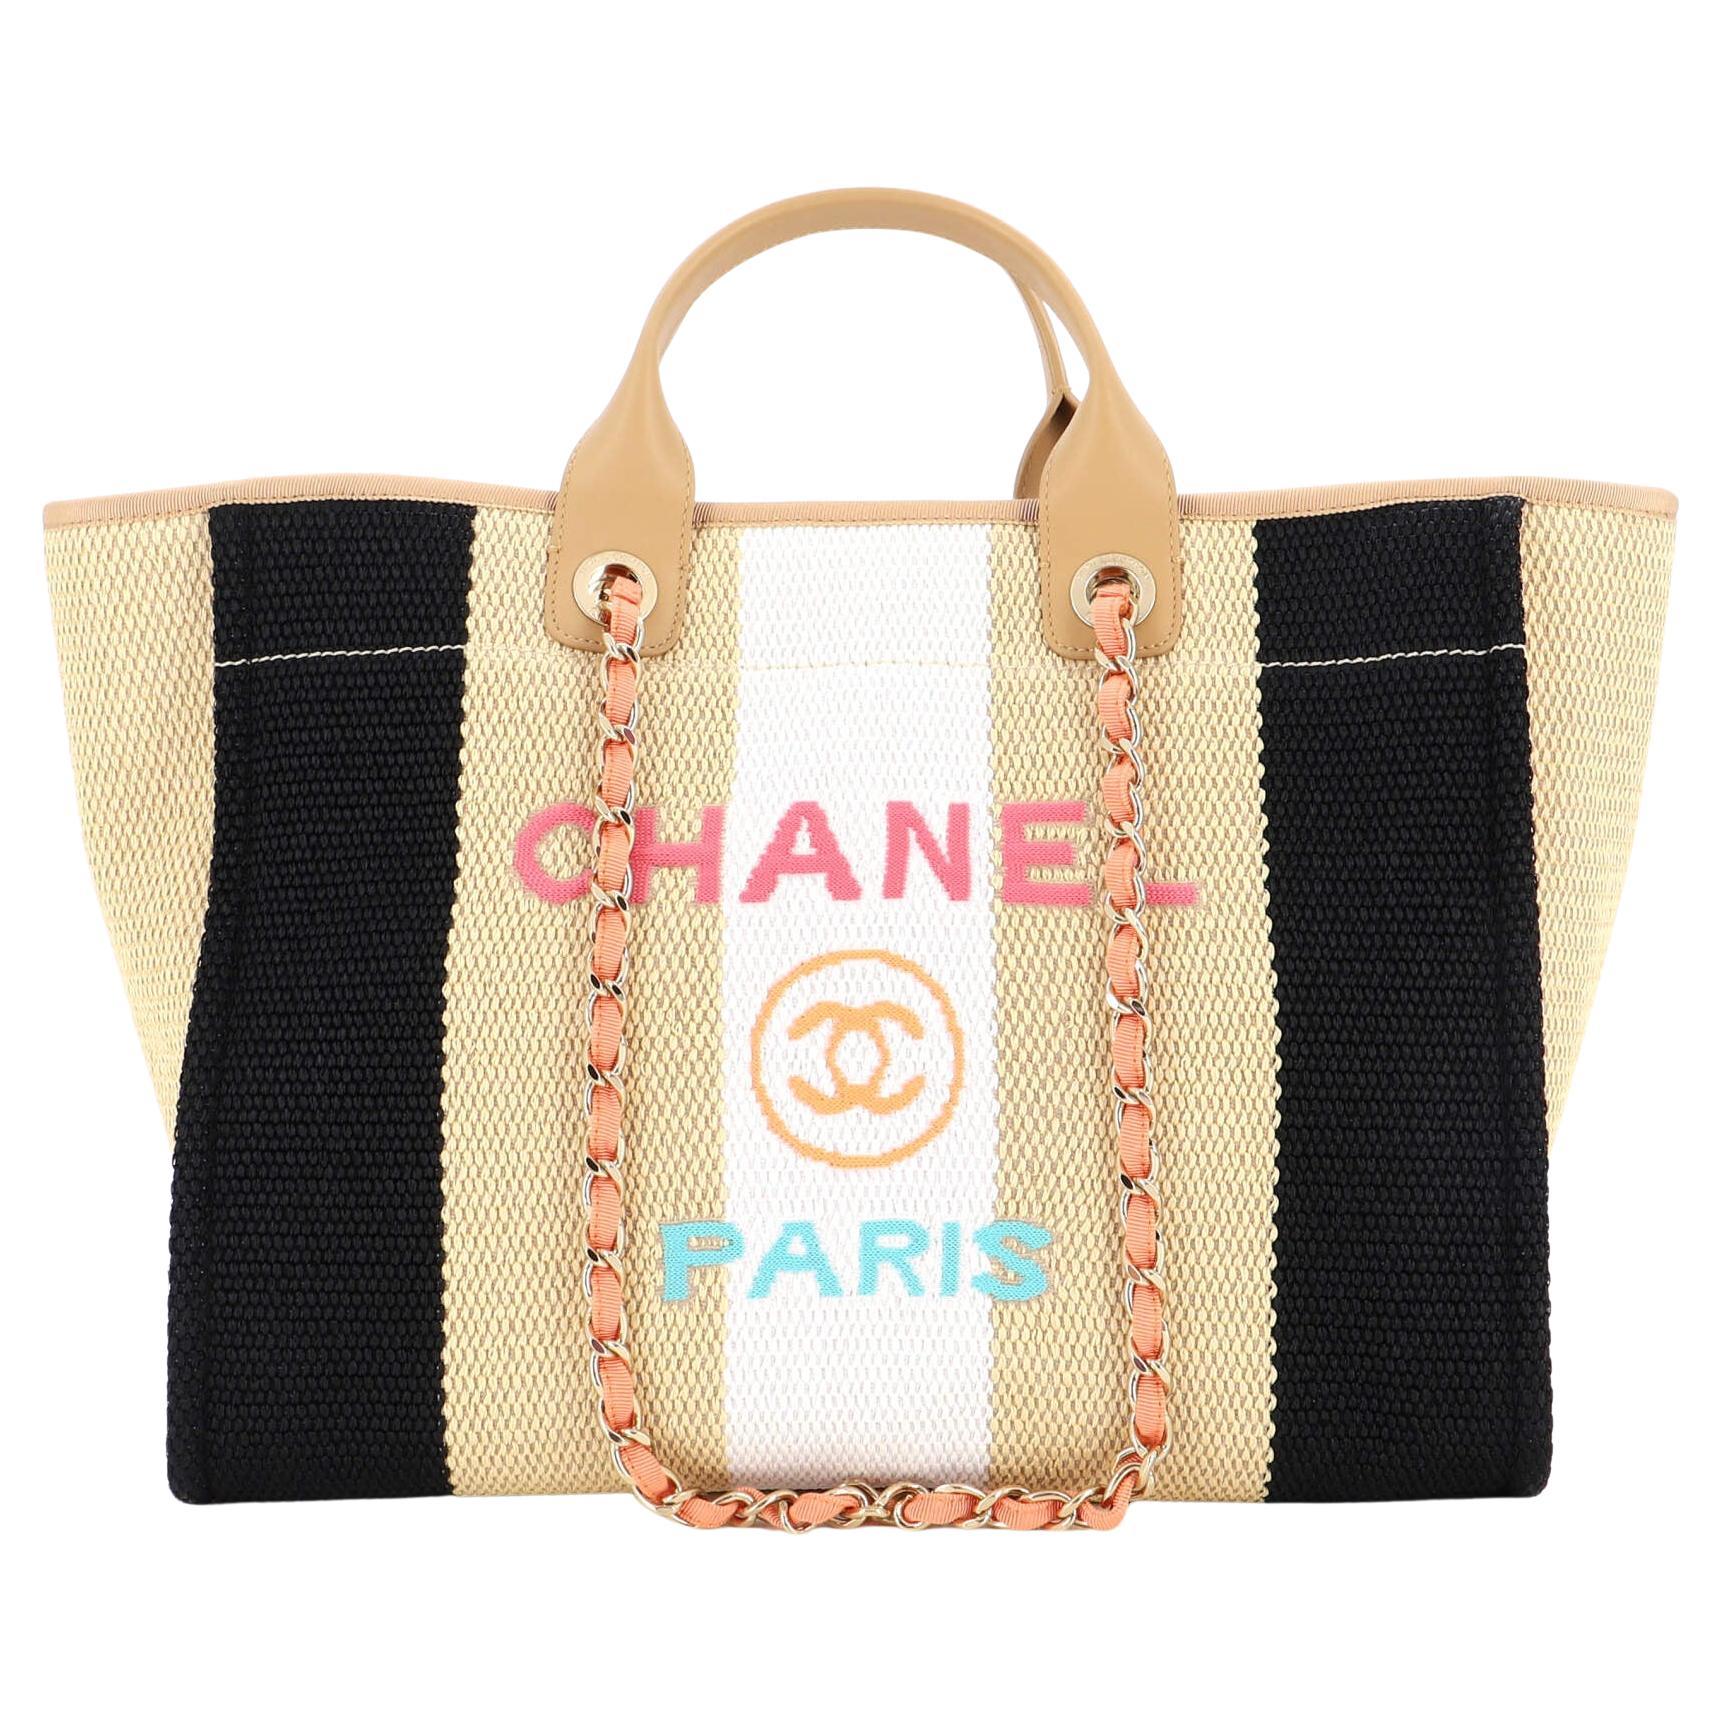 CHANEL Deauville Tote Bag in Light Gray Canvas at 1stDibs